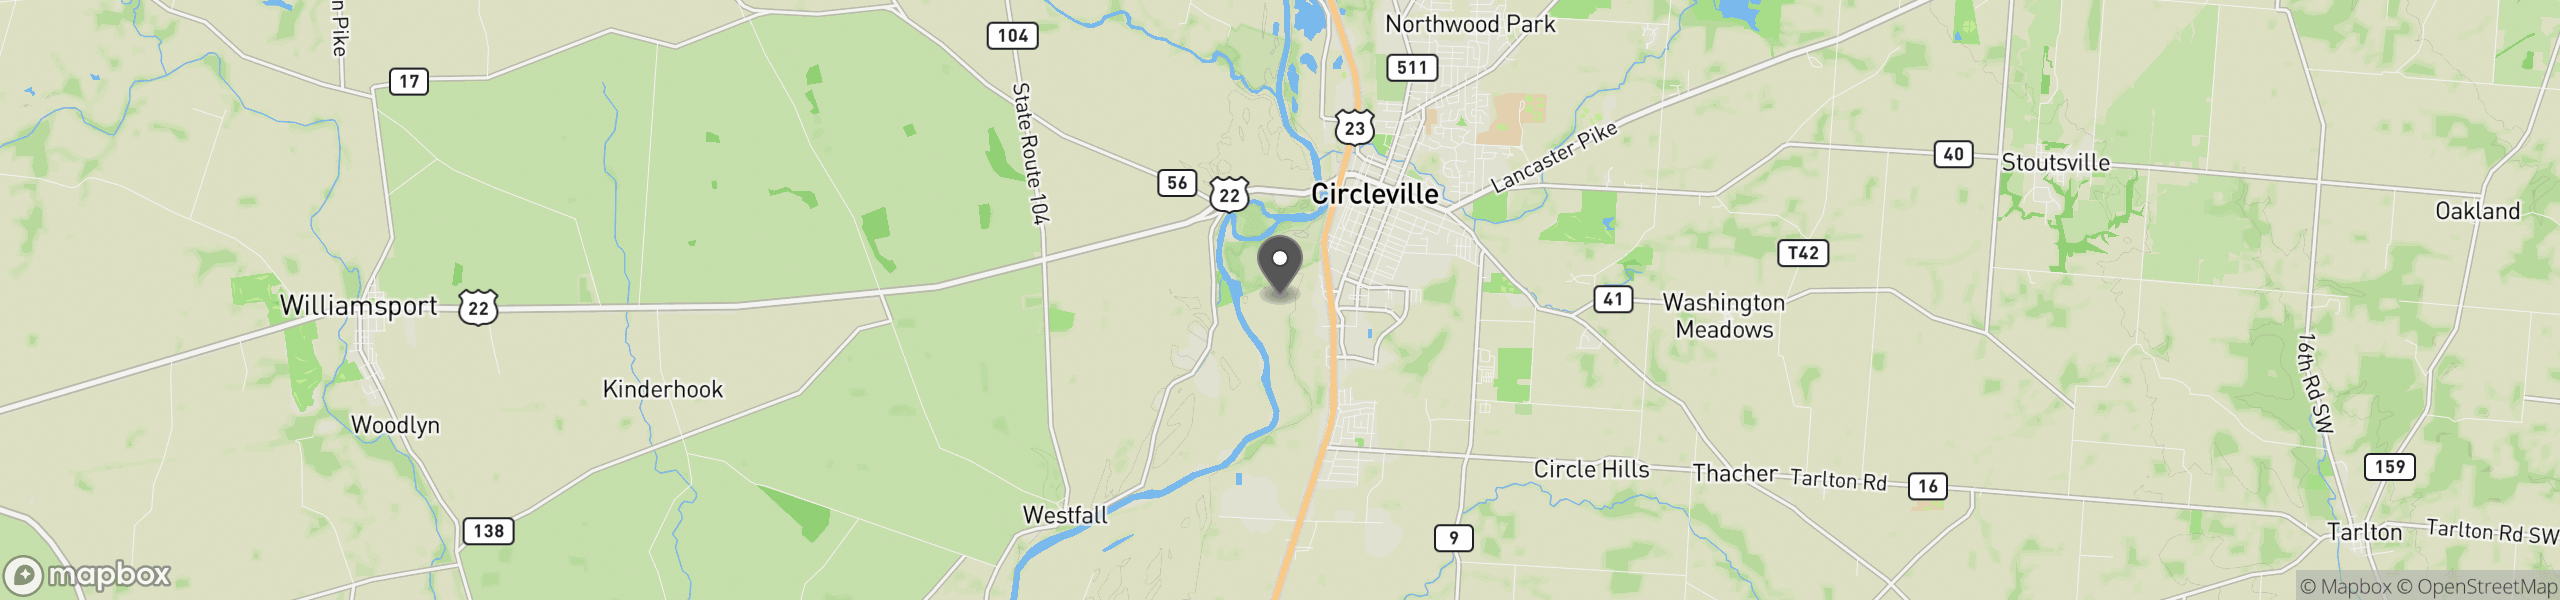 Circleville, OH 43113